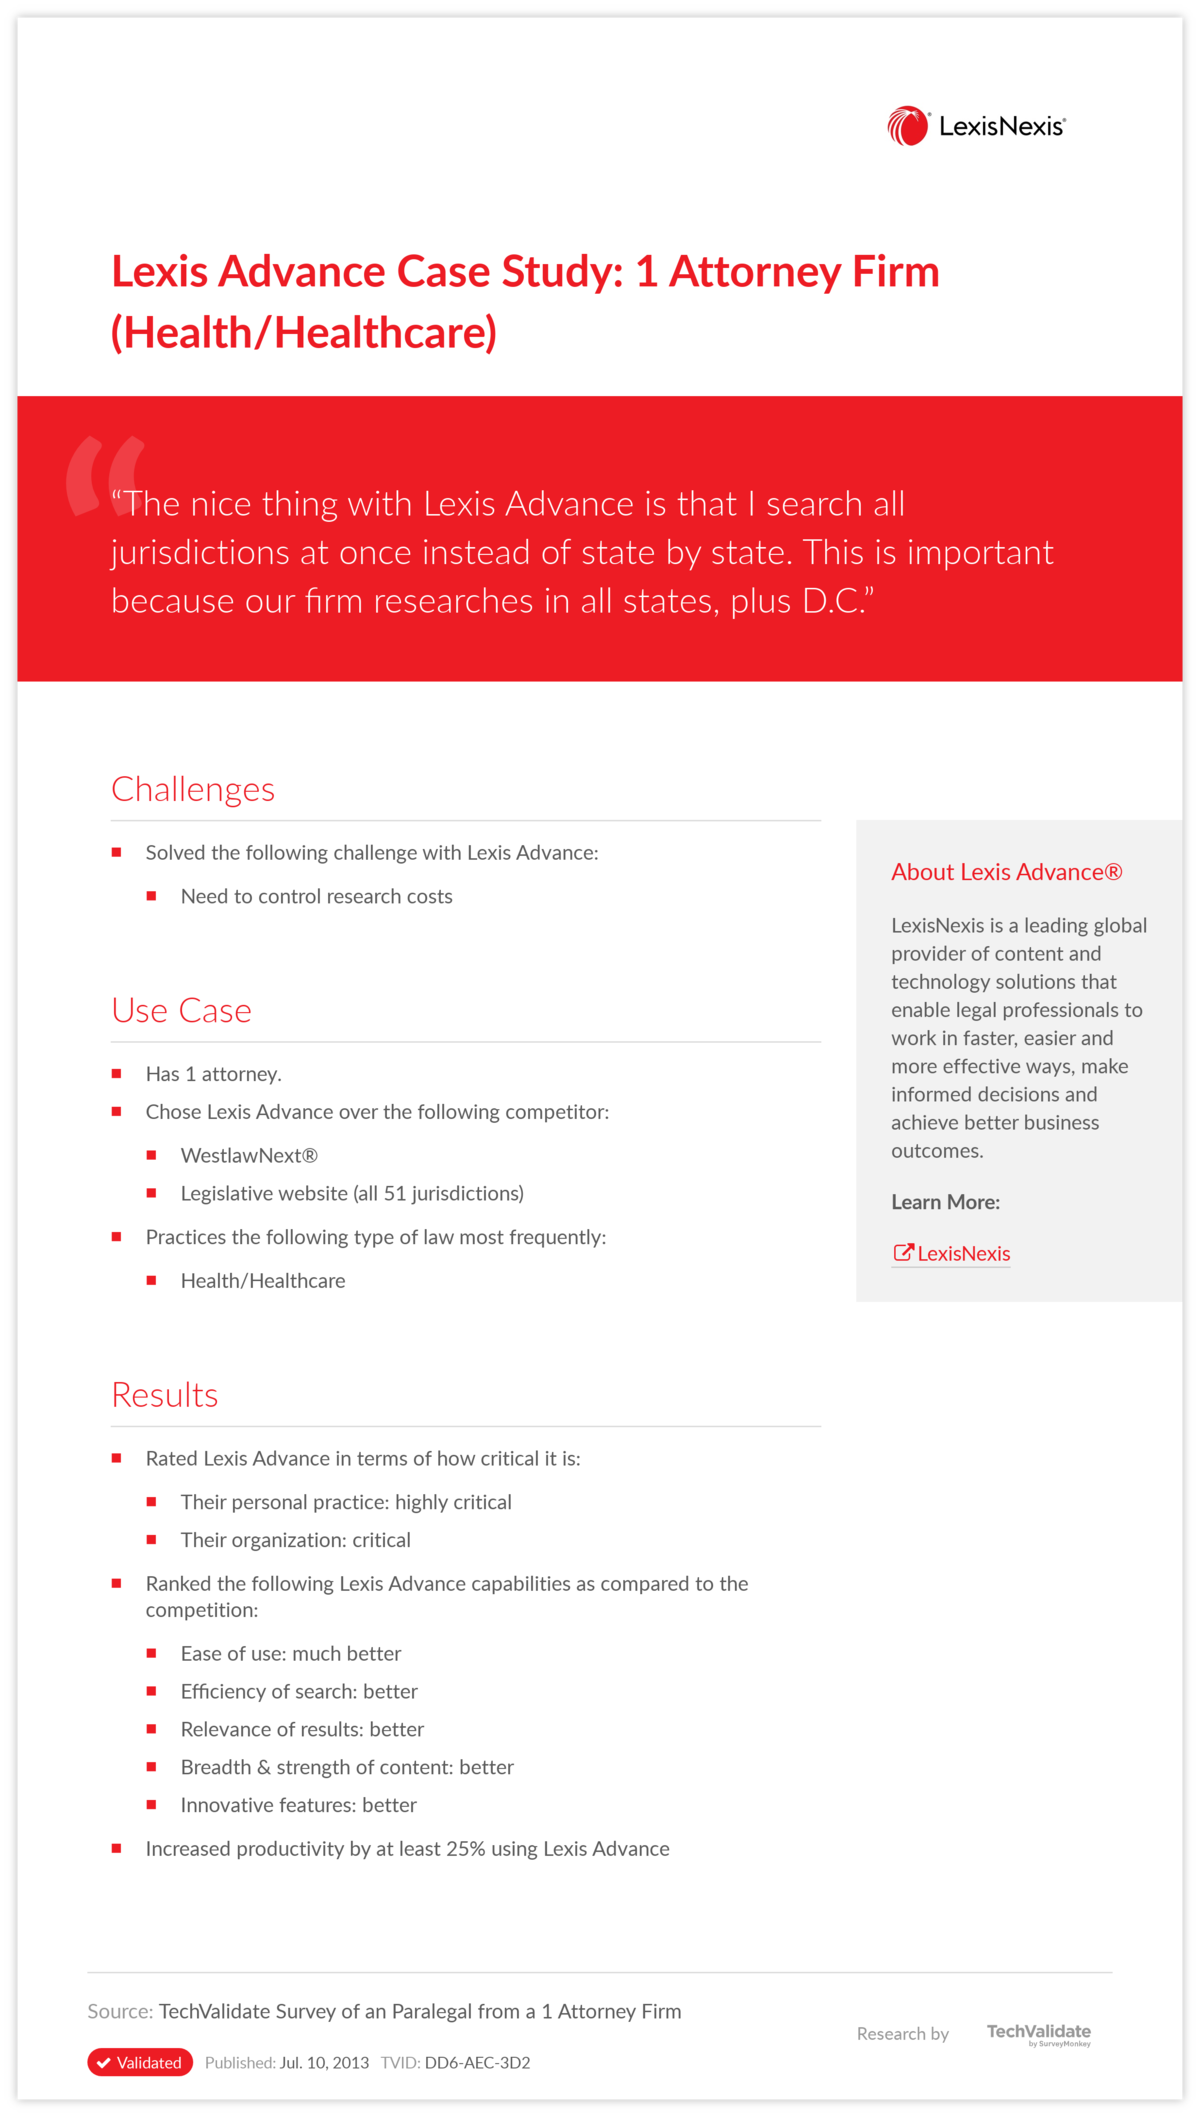 Lexis Advance Case Study: 1 Attorney Firm (Health/Healthcare)